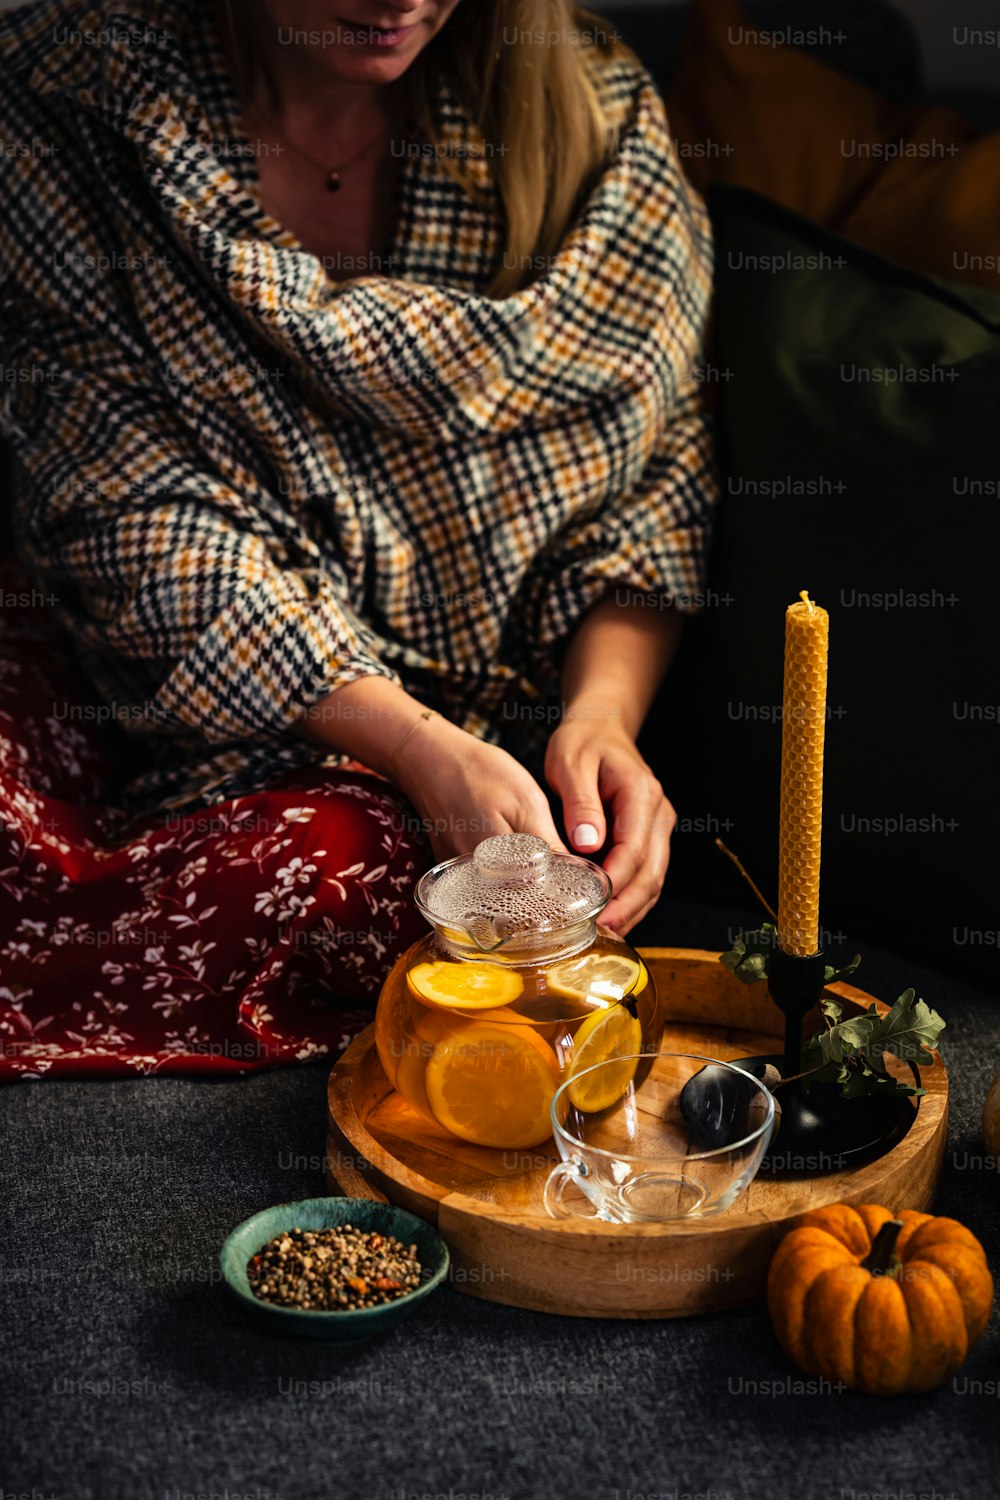 a woman sitting on a couch next to a tray of food